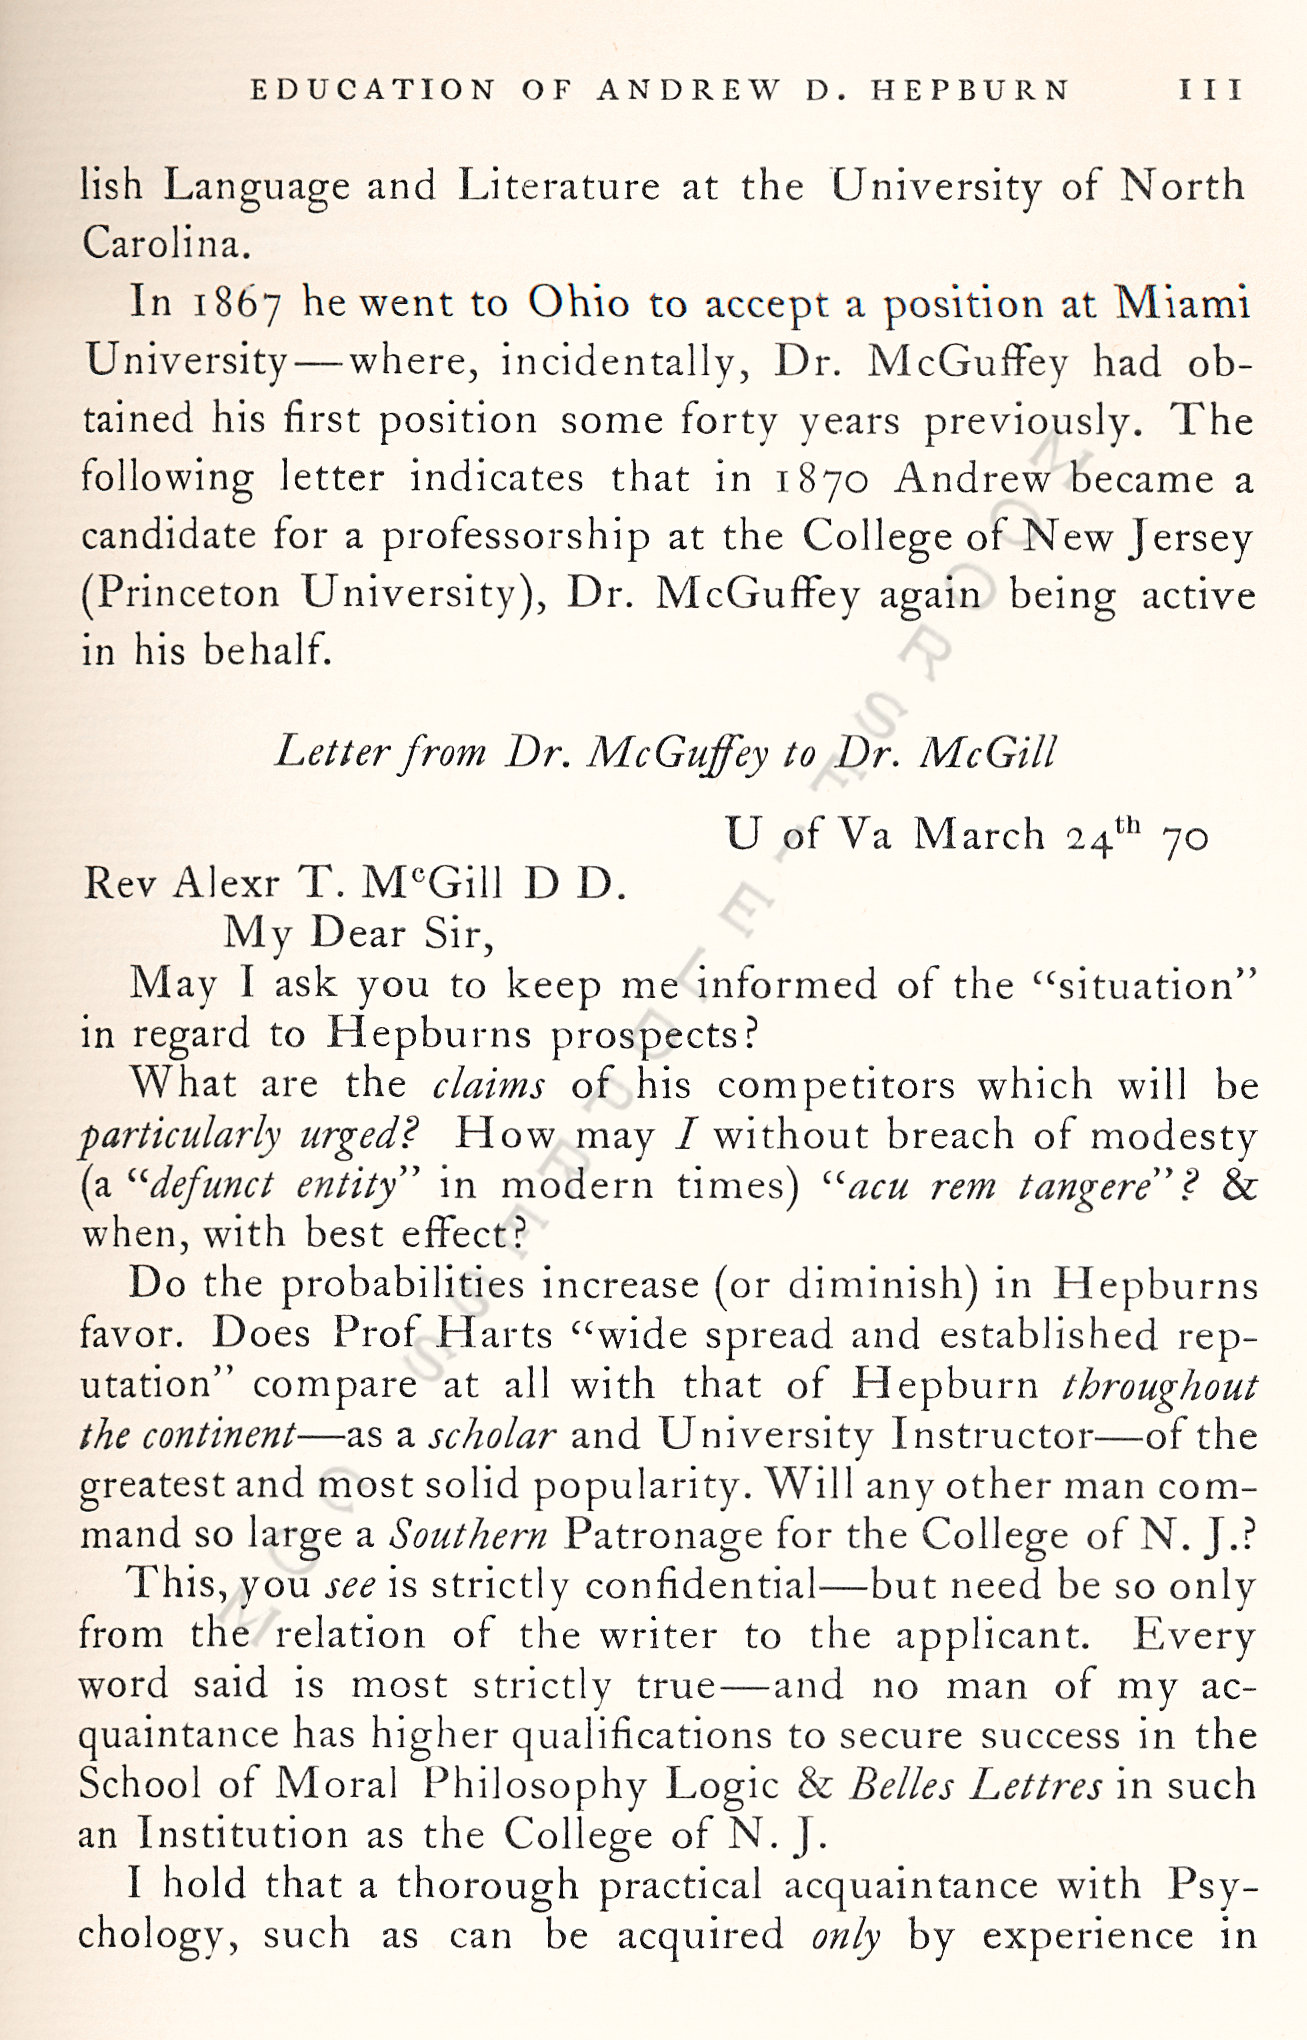 McGill
                      Papers-Education of Andrew D. Hepburn 1848
                      Son-in-law of William Holmes McGuffey 1848-1857